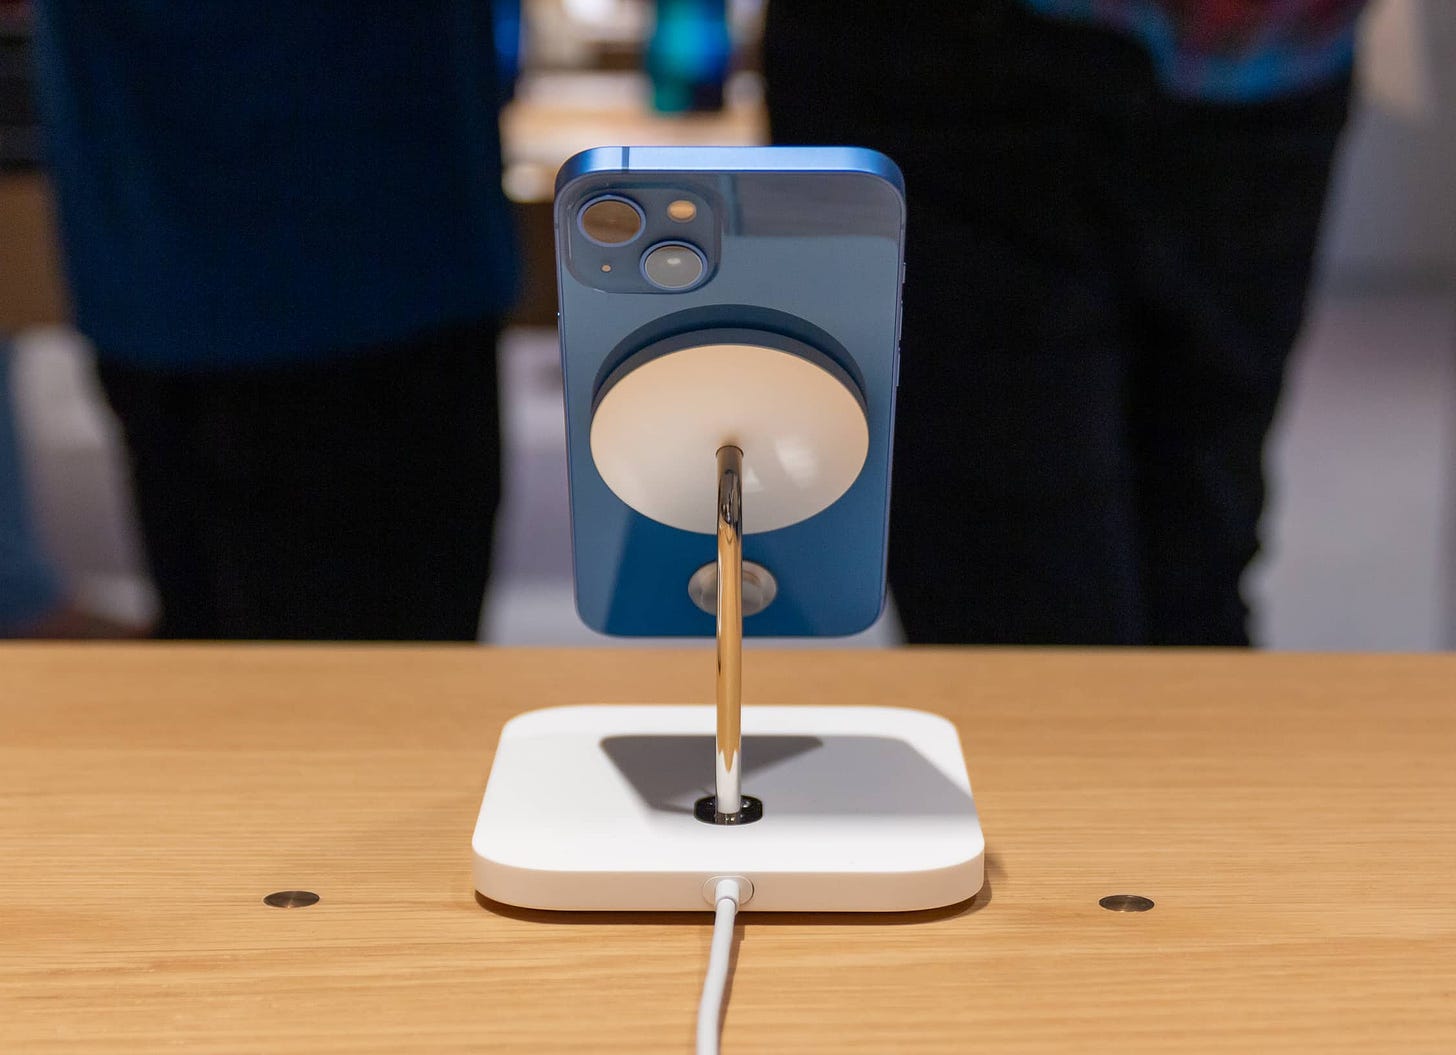 A MagSafe dock charging an iPhone 13 mini at an Apple Store.